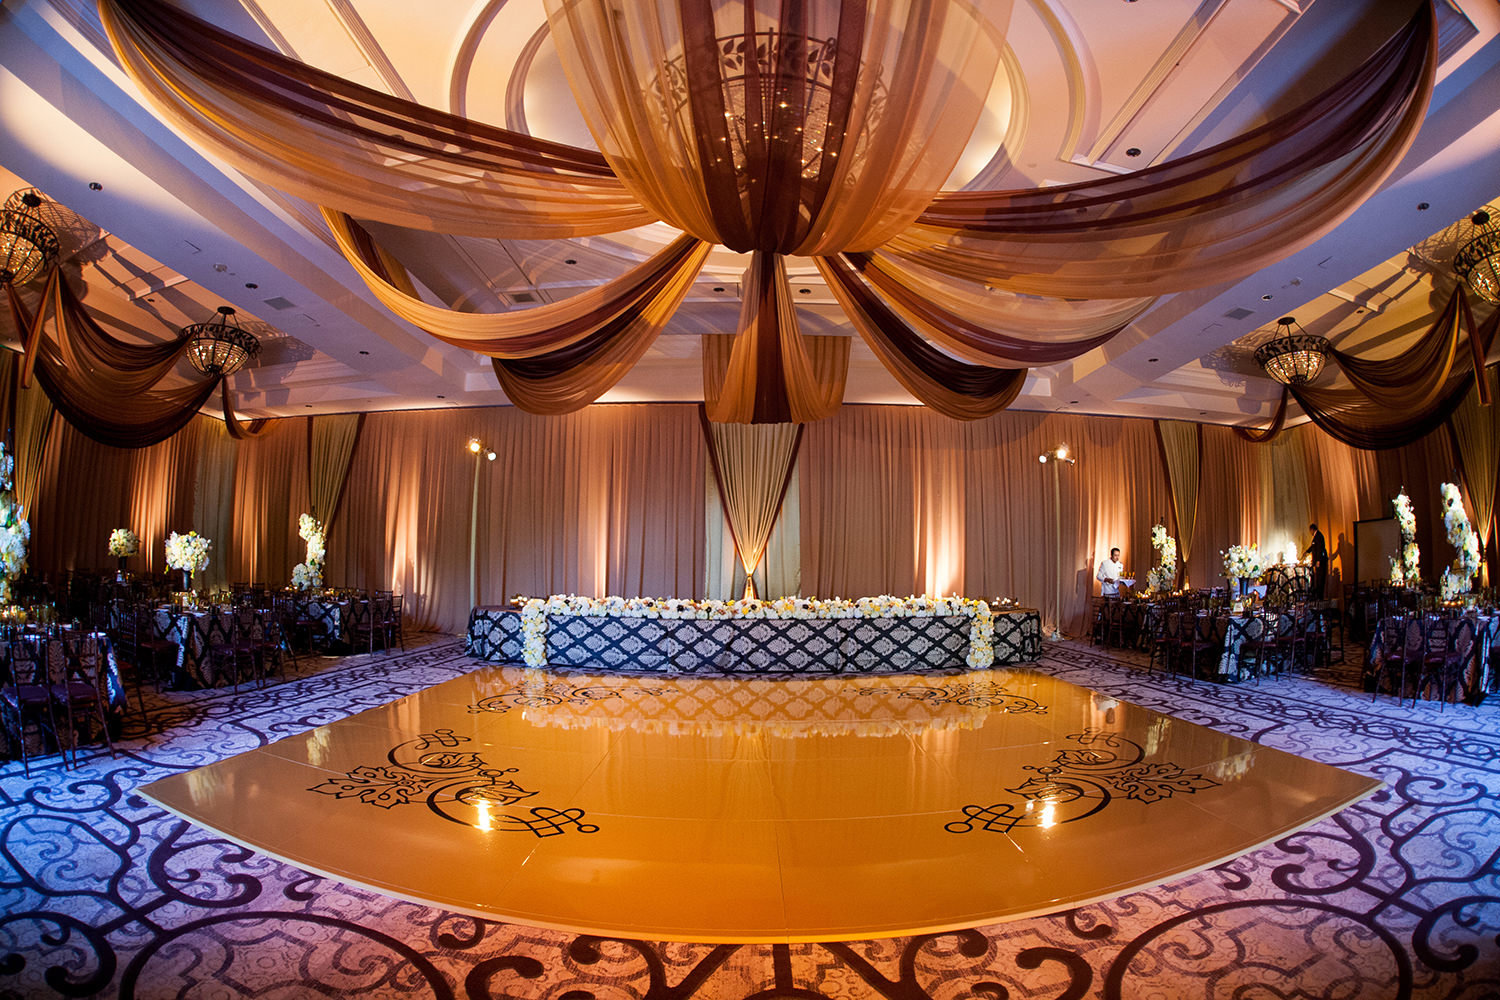 Rich colors and uplighting set a stunning scene for this wedding reception